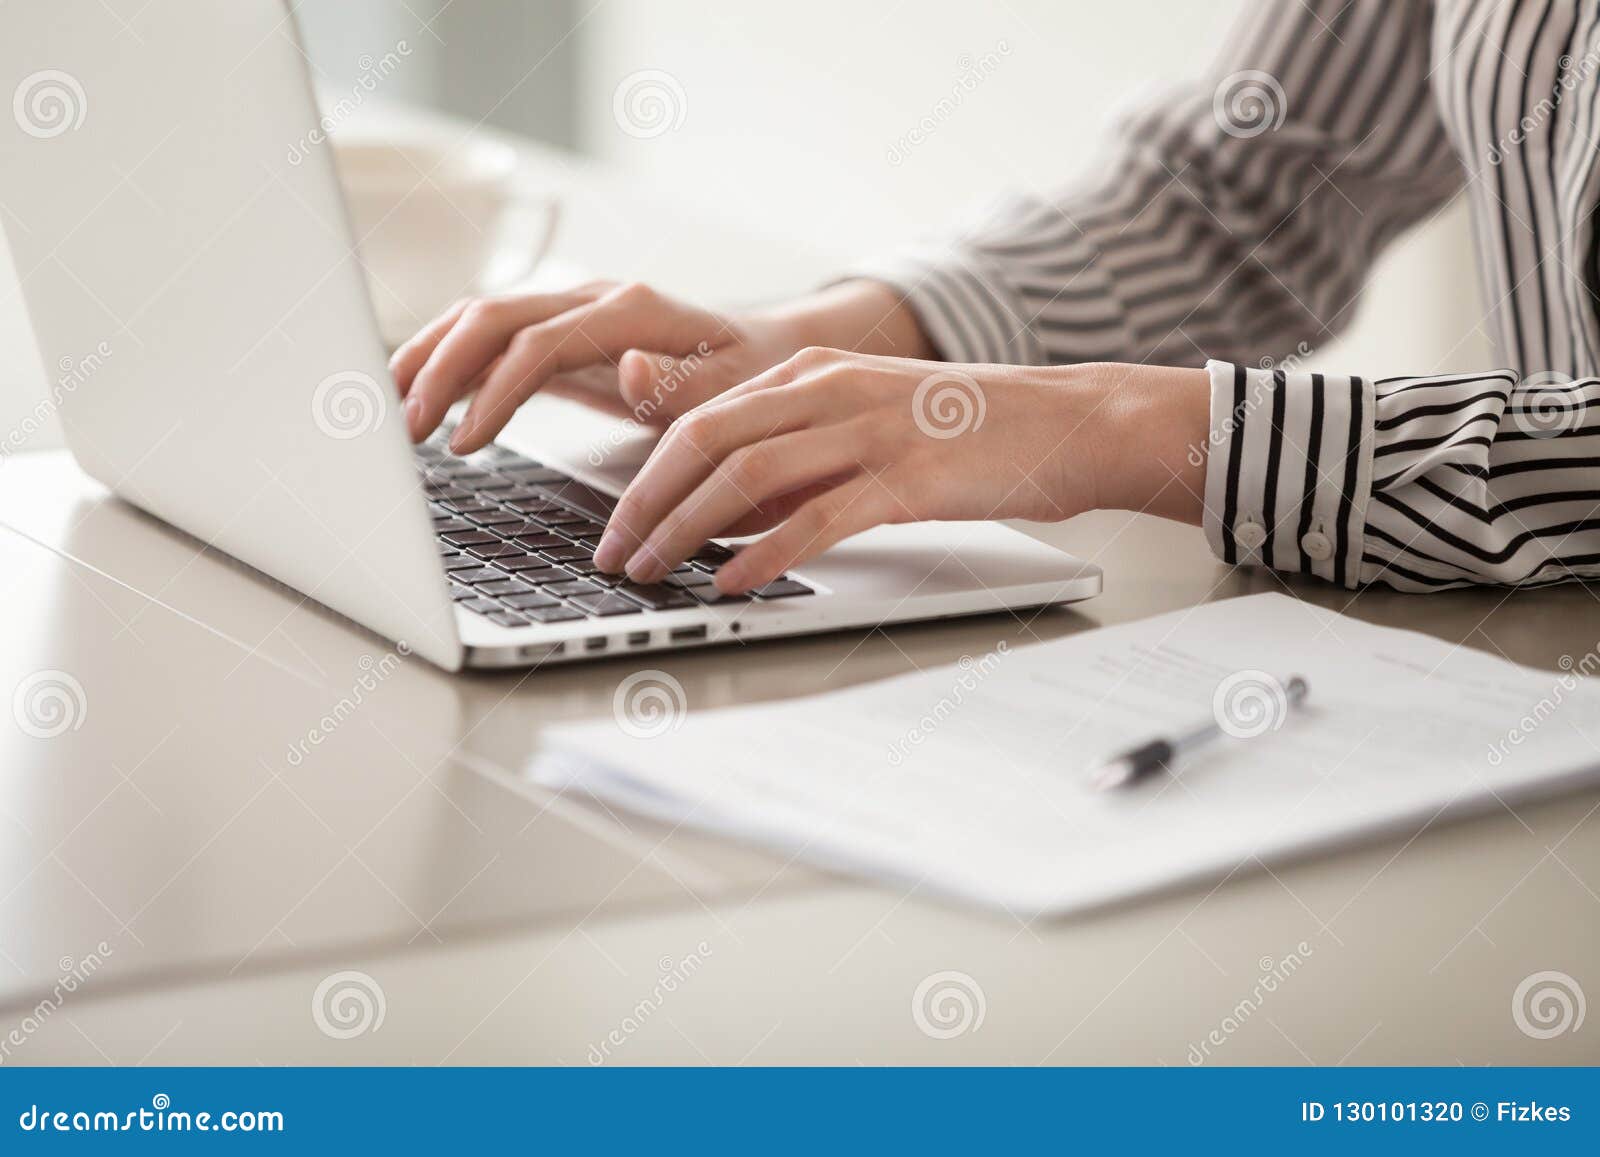 businesswoman working on laptop, female hands typing on keyboard